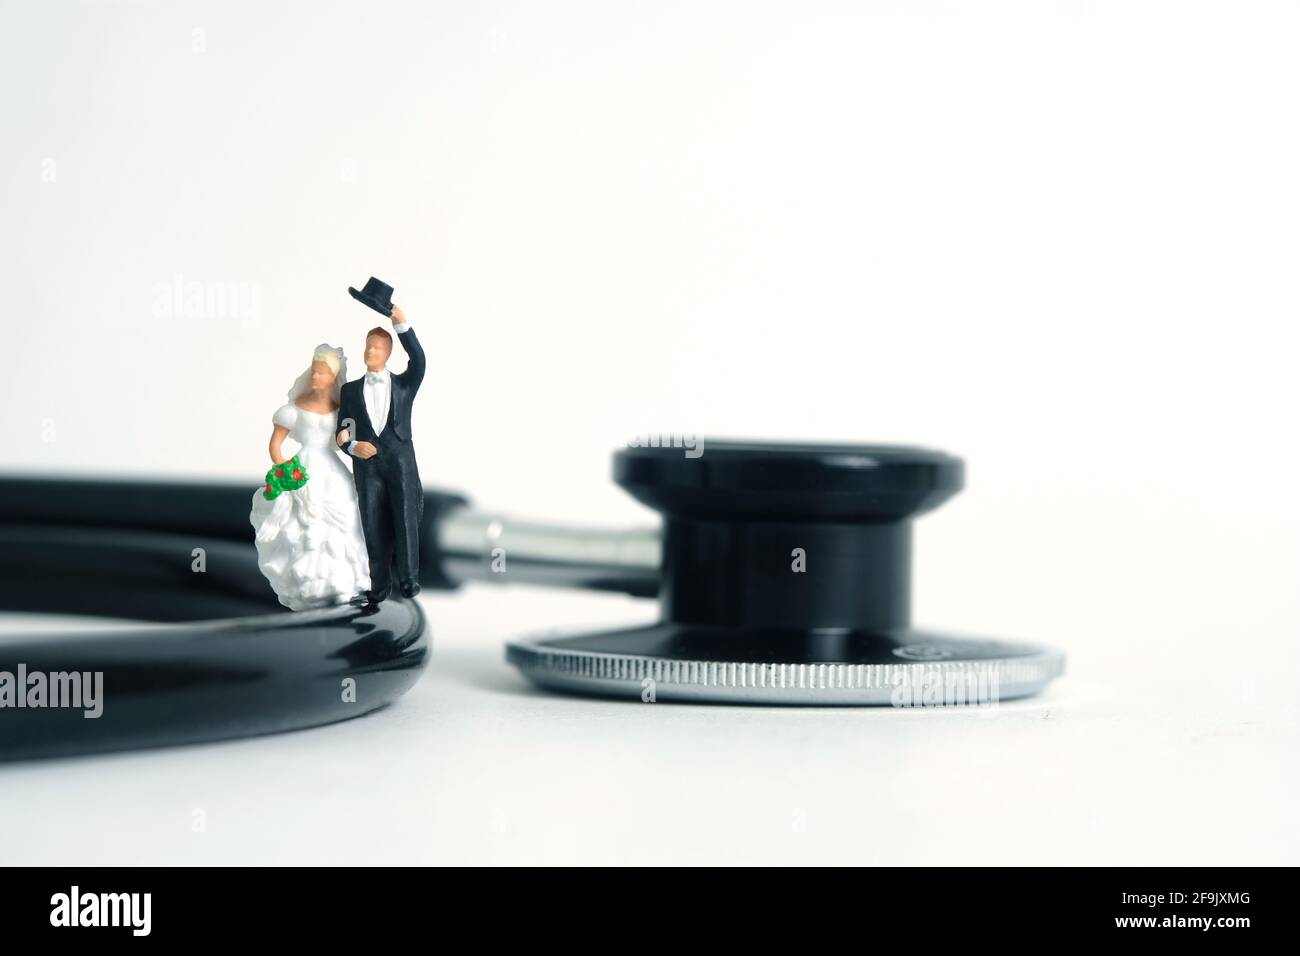 Wedding marriage and couple medical check-up concept miniature people toy photography. Bride and groom with stethoscope isolated on white background. Stock Photo